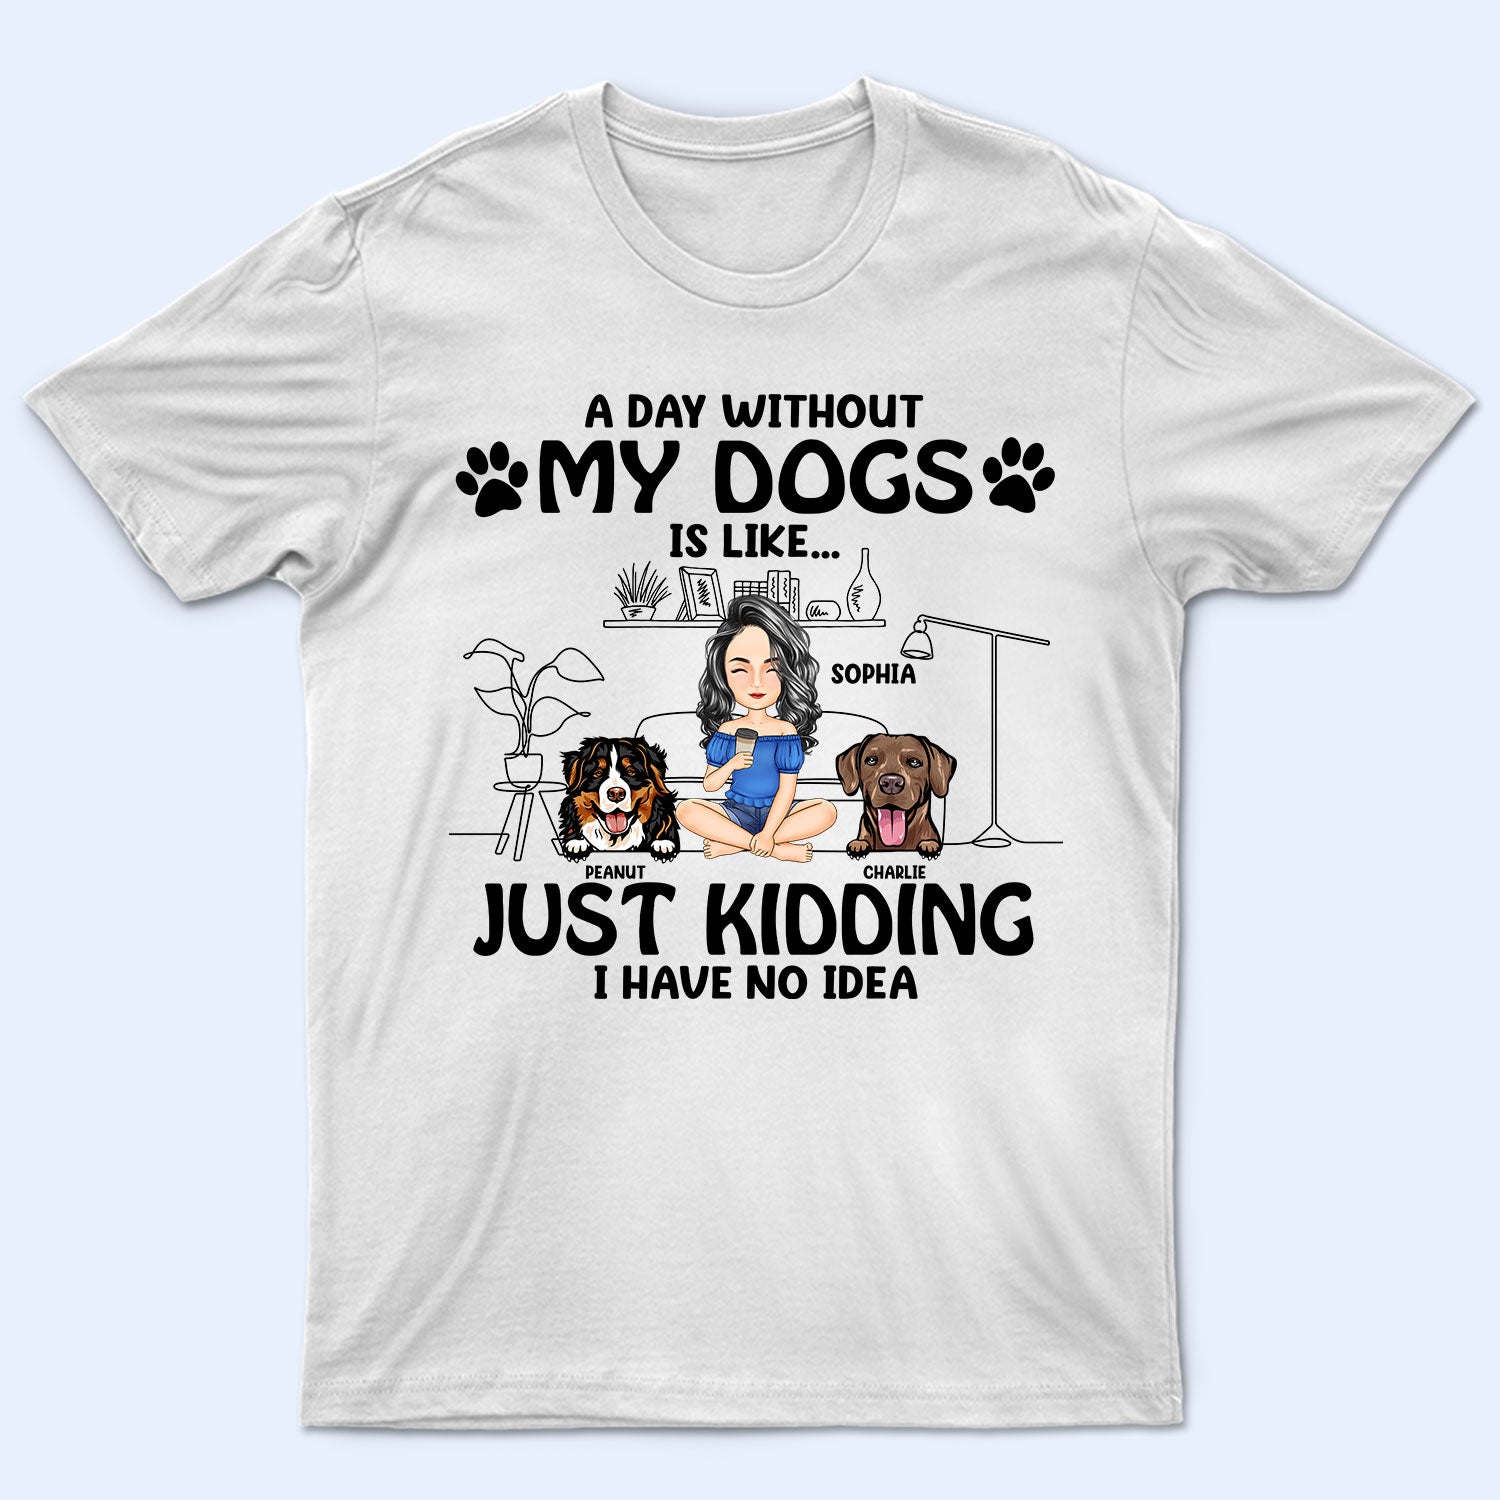 A Day Without My Dogs - Funny Gift For Dog Lovers - Personalized T Shirt